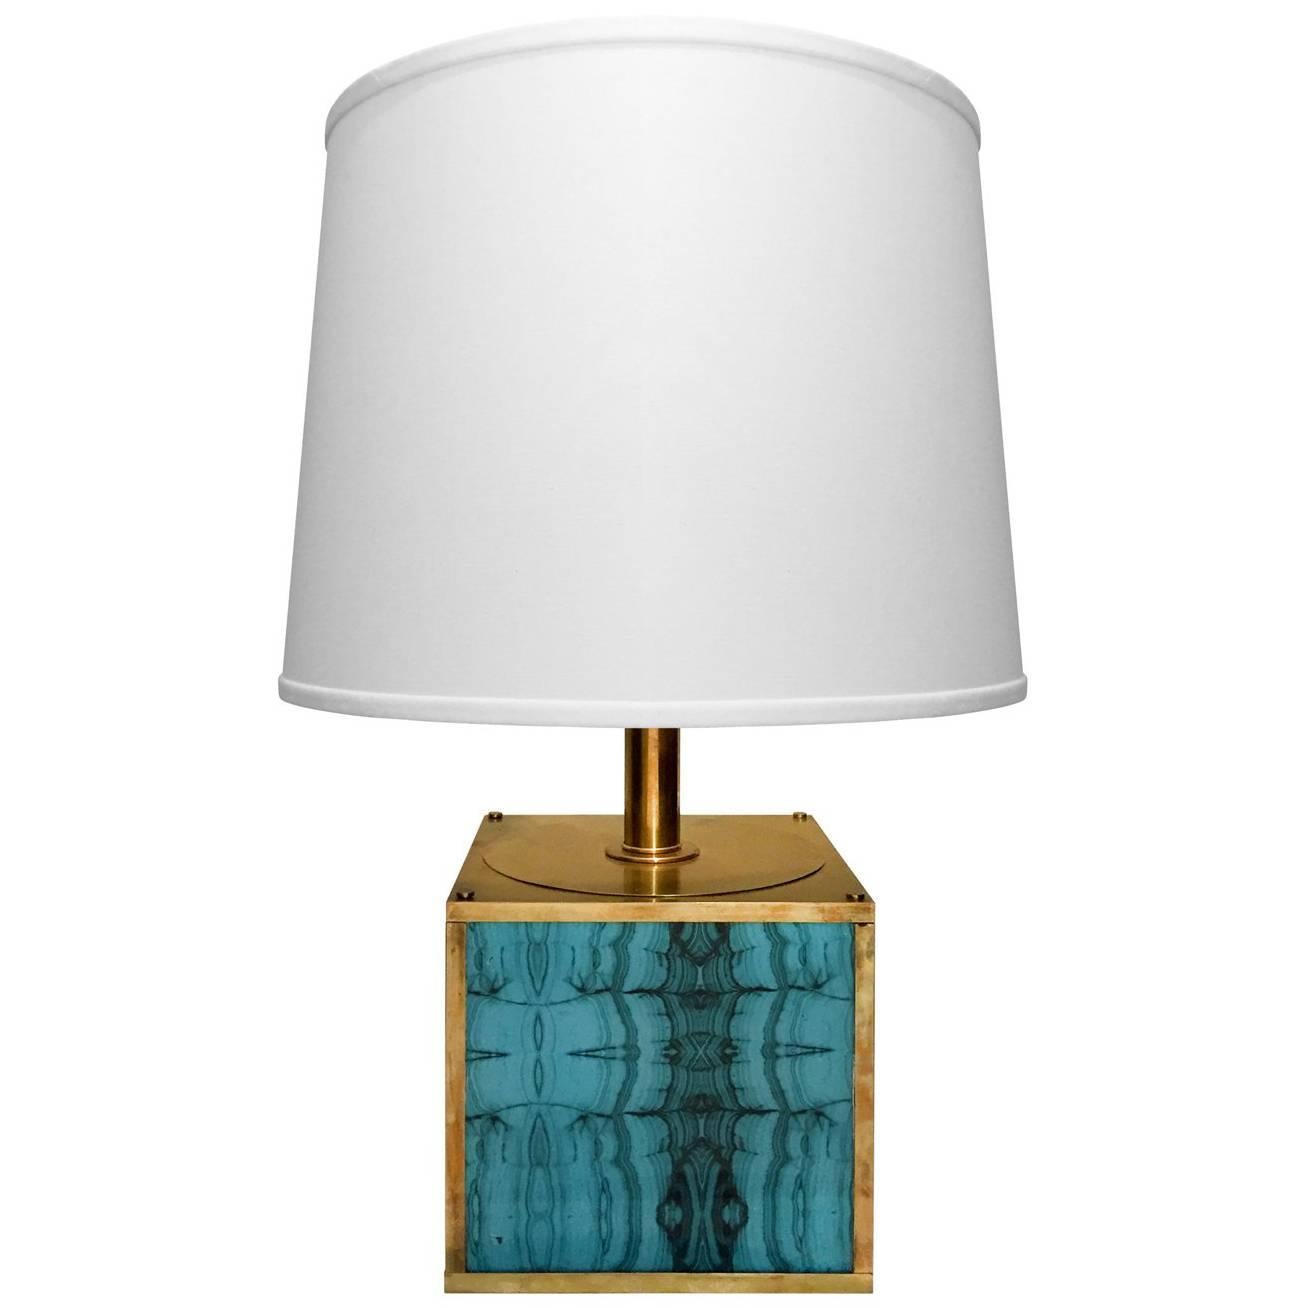 1970s Brass Cube Table Lamp with Turquoise Plexi Inserts